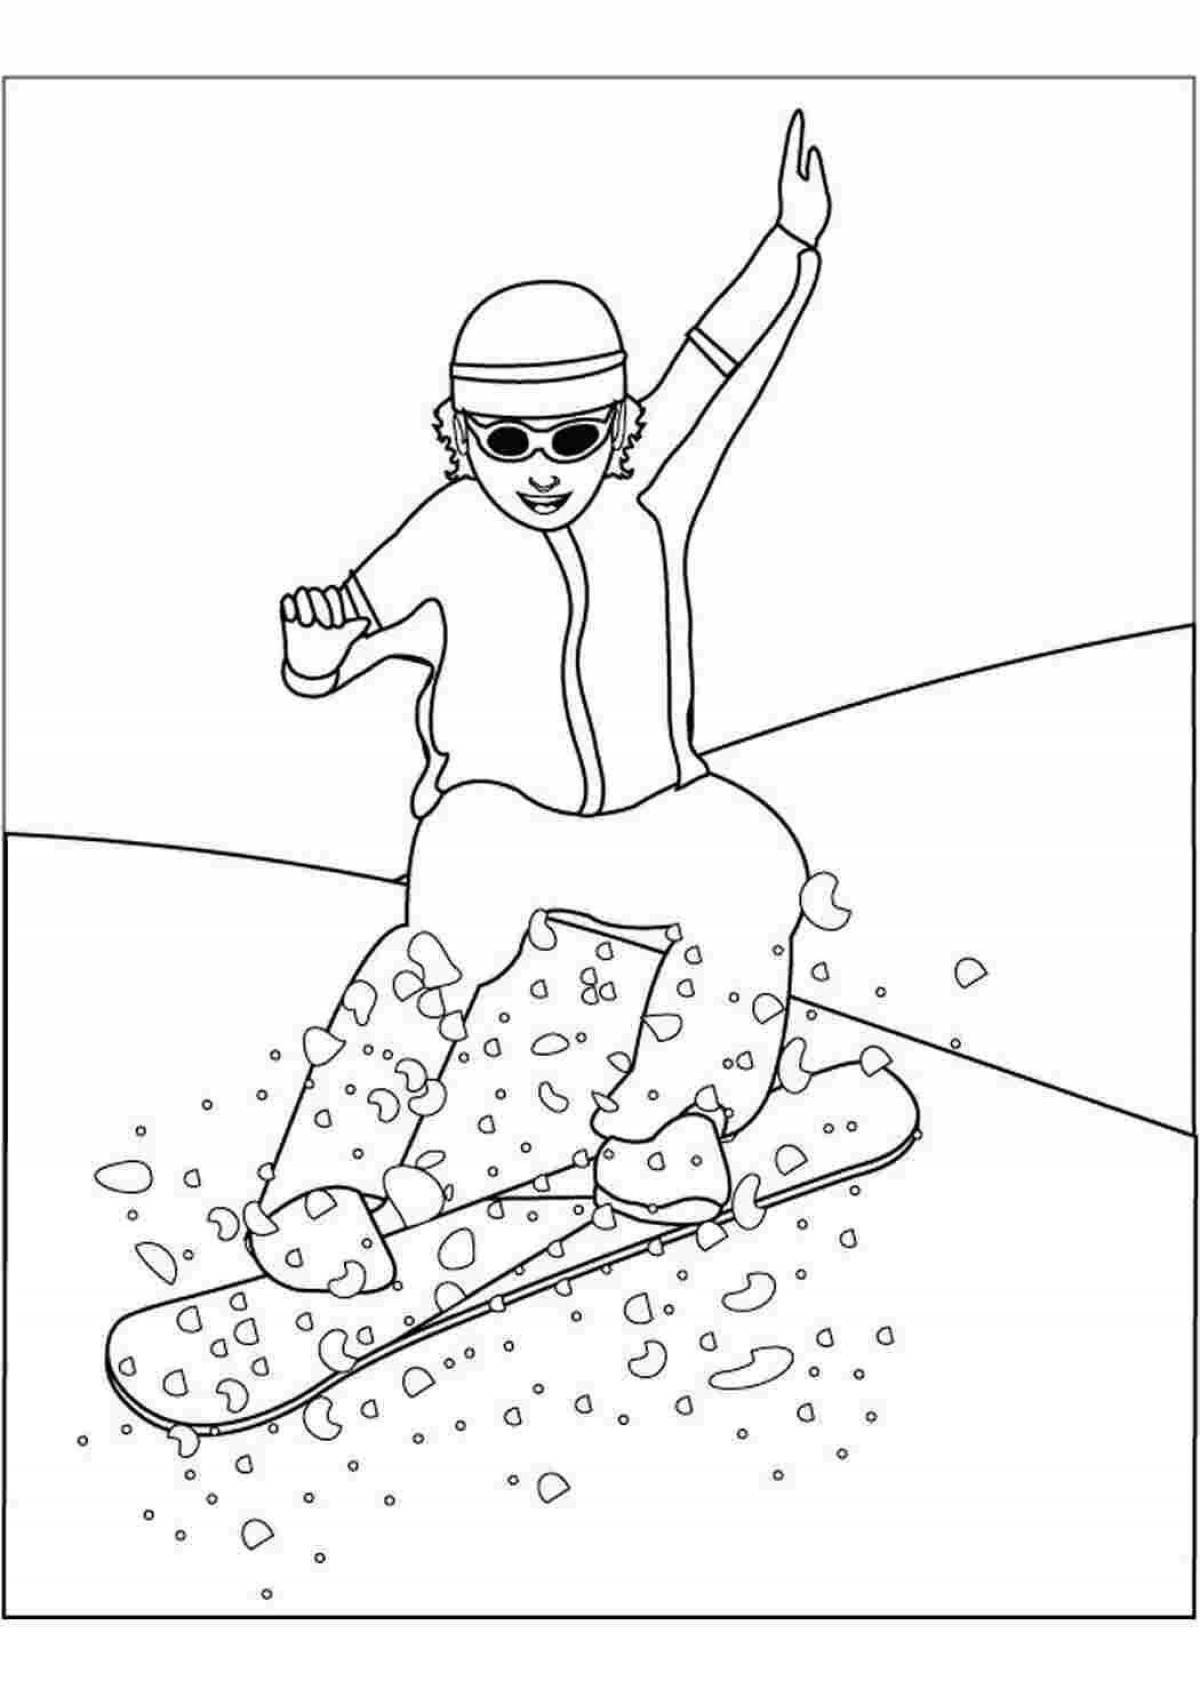 A fun coloring book for kids playing Olympic sports